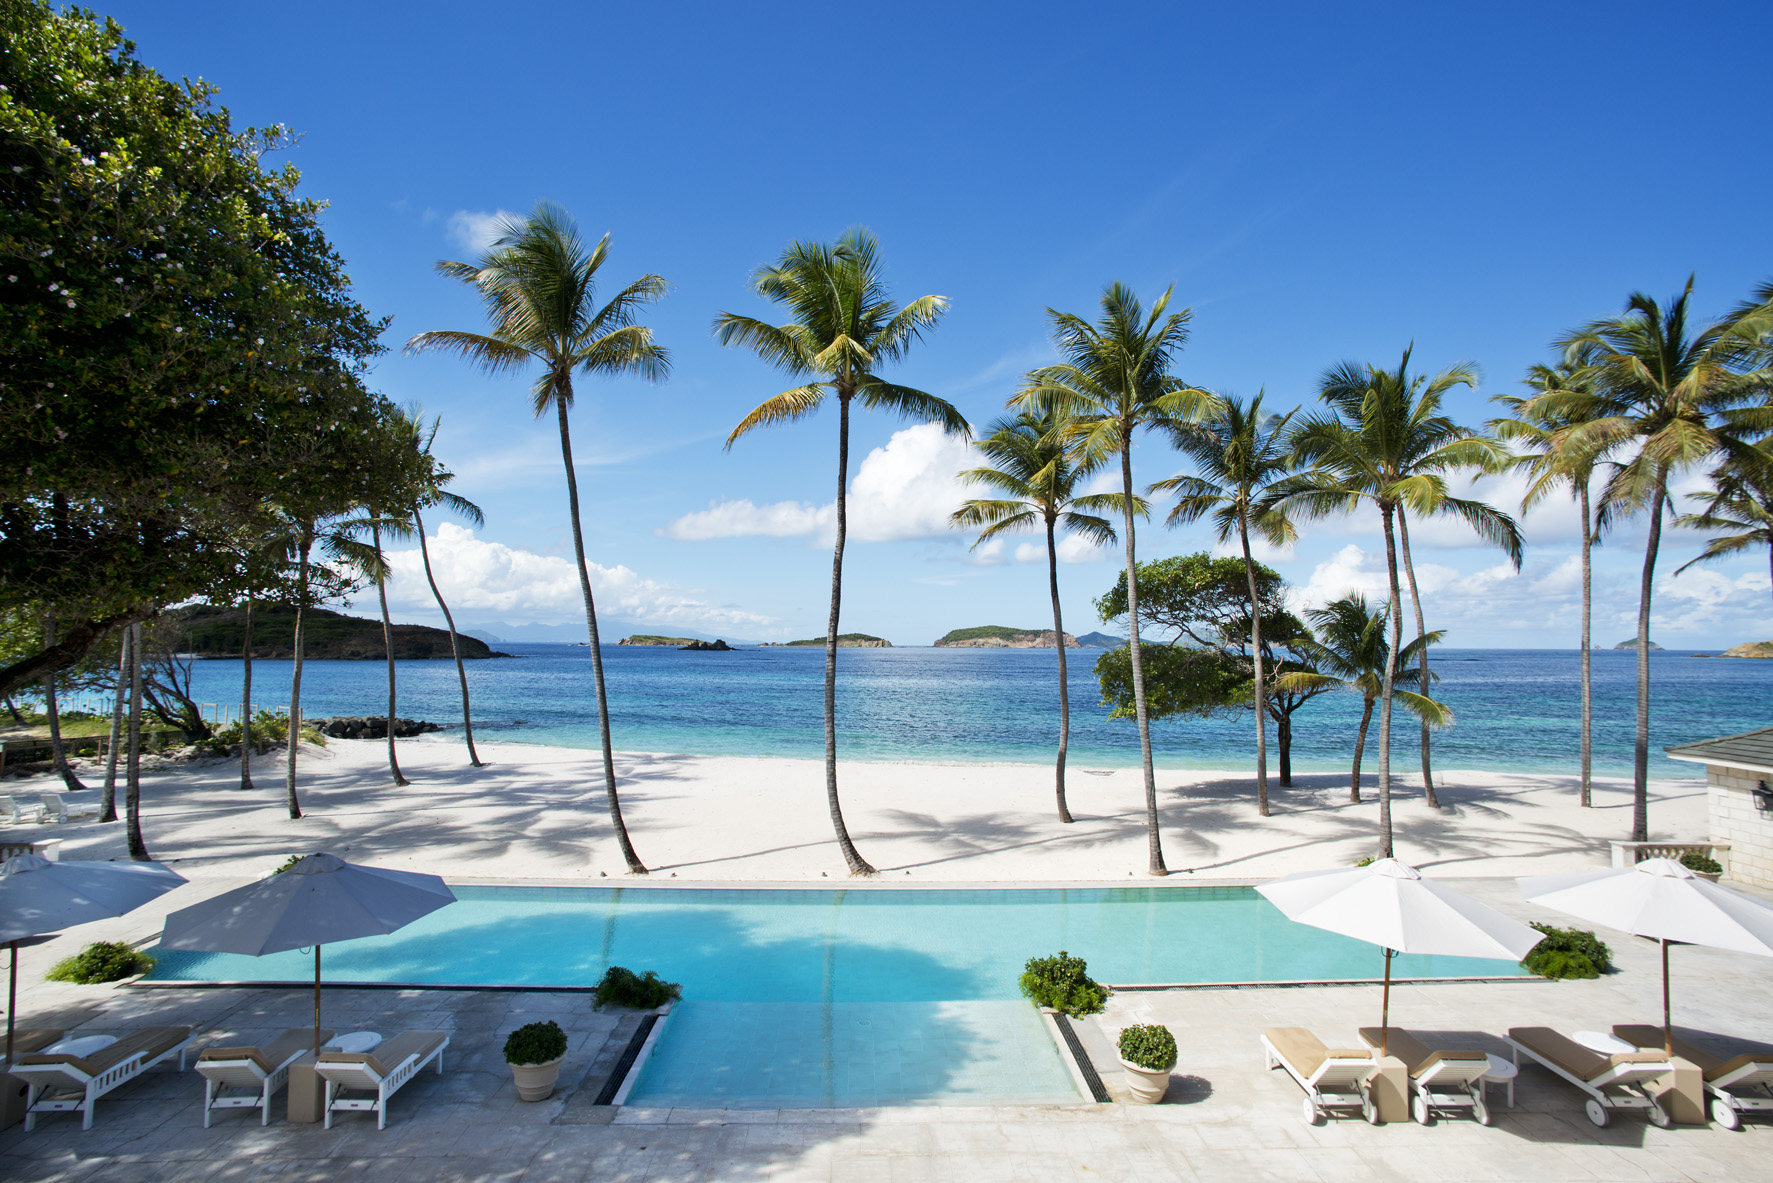 Swimming pool and beach of Palm Beach, Mustique